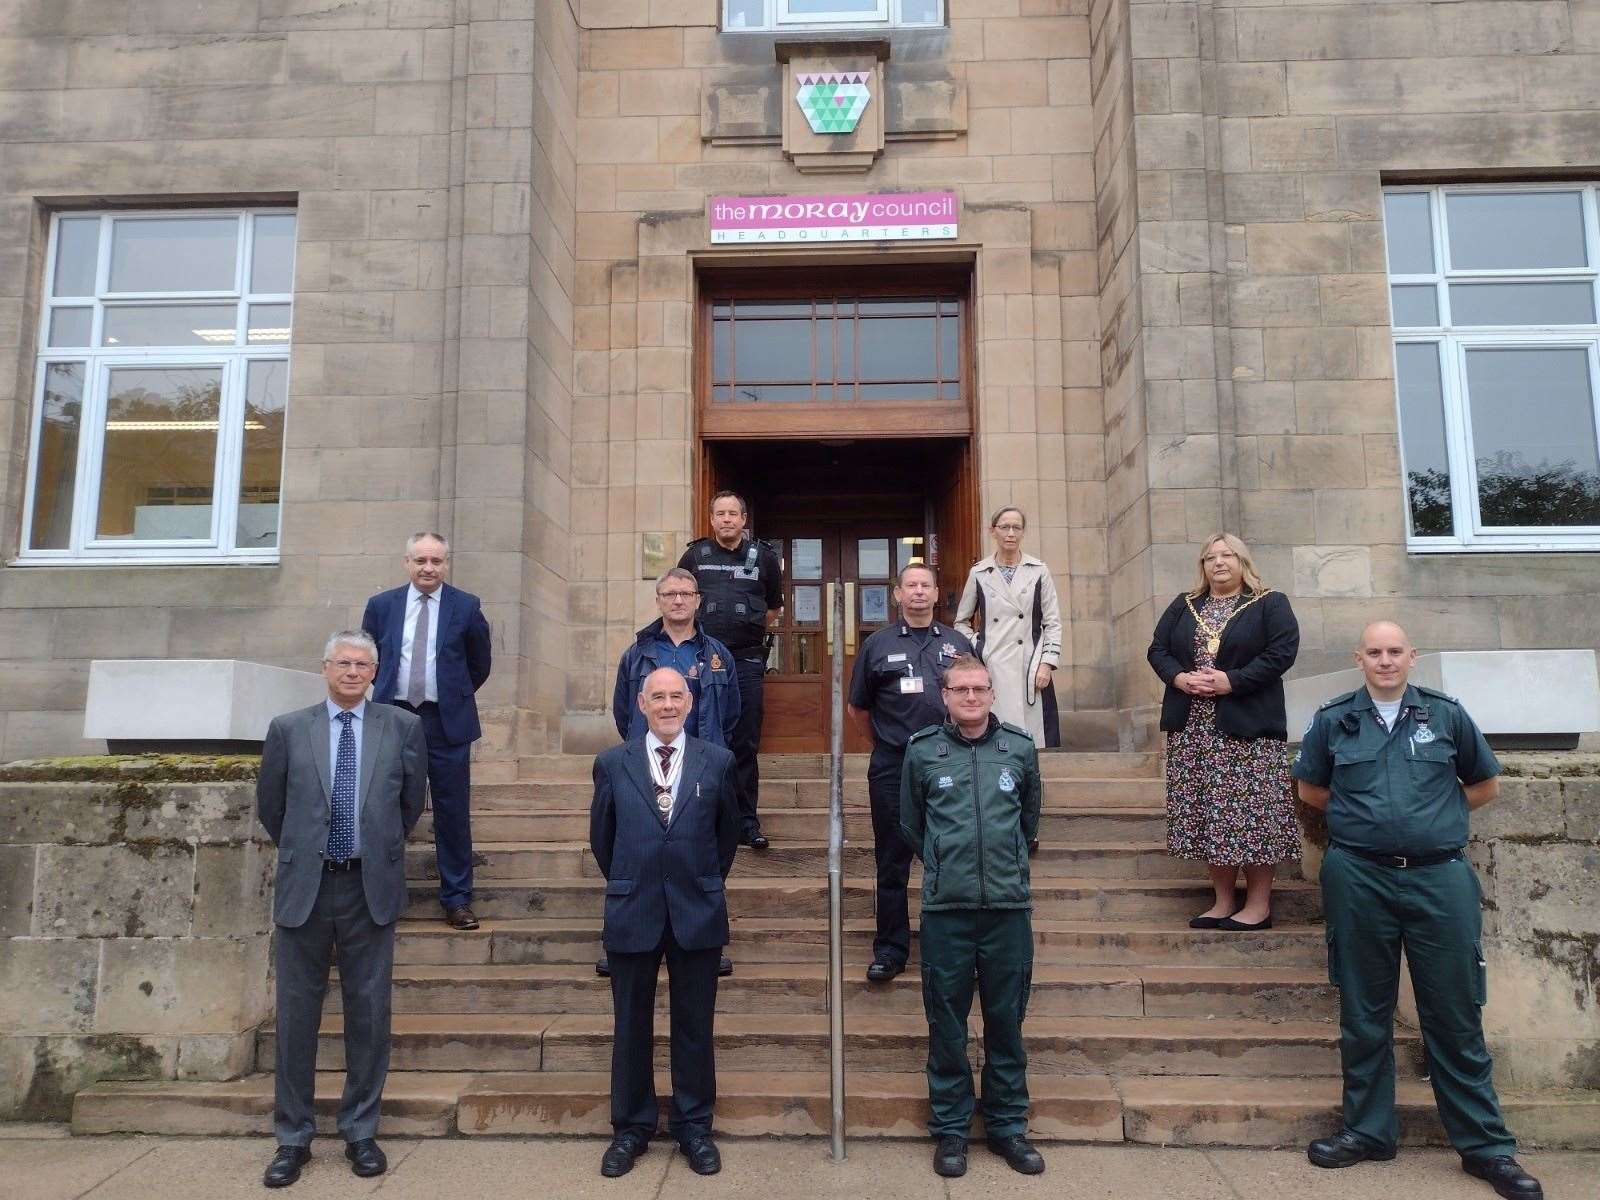 Moray Council leaders and community and emergency services representatives gather to observe Emergency Services Day at council headquarters in Elgin.